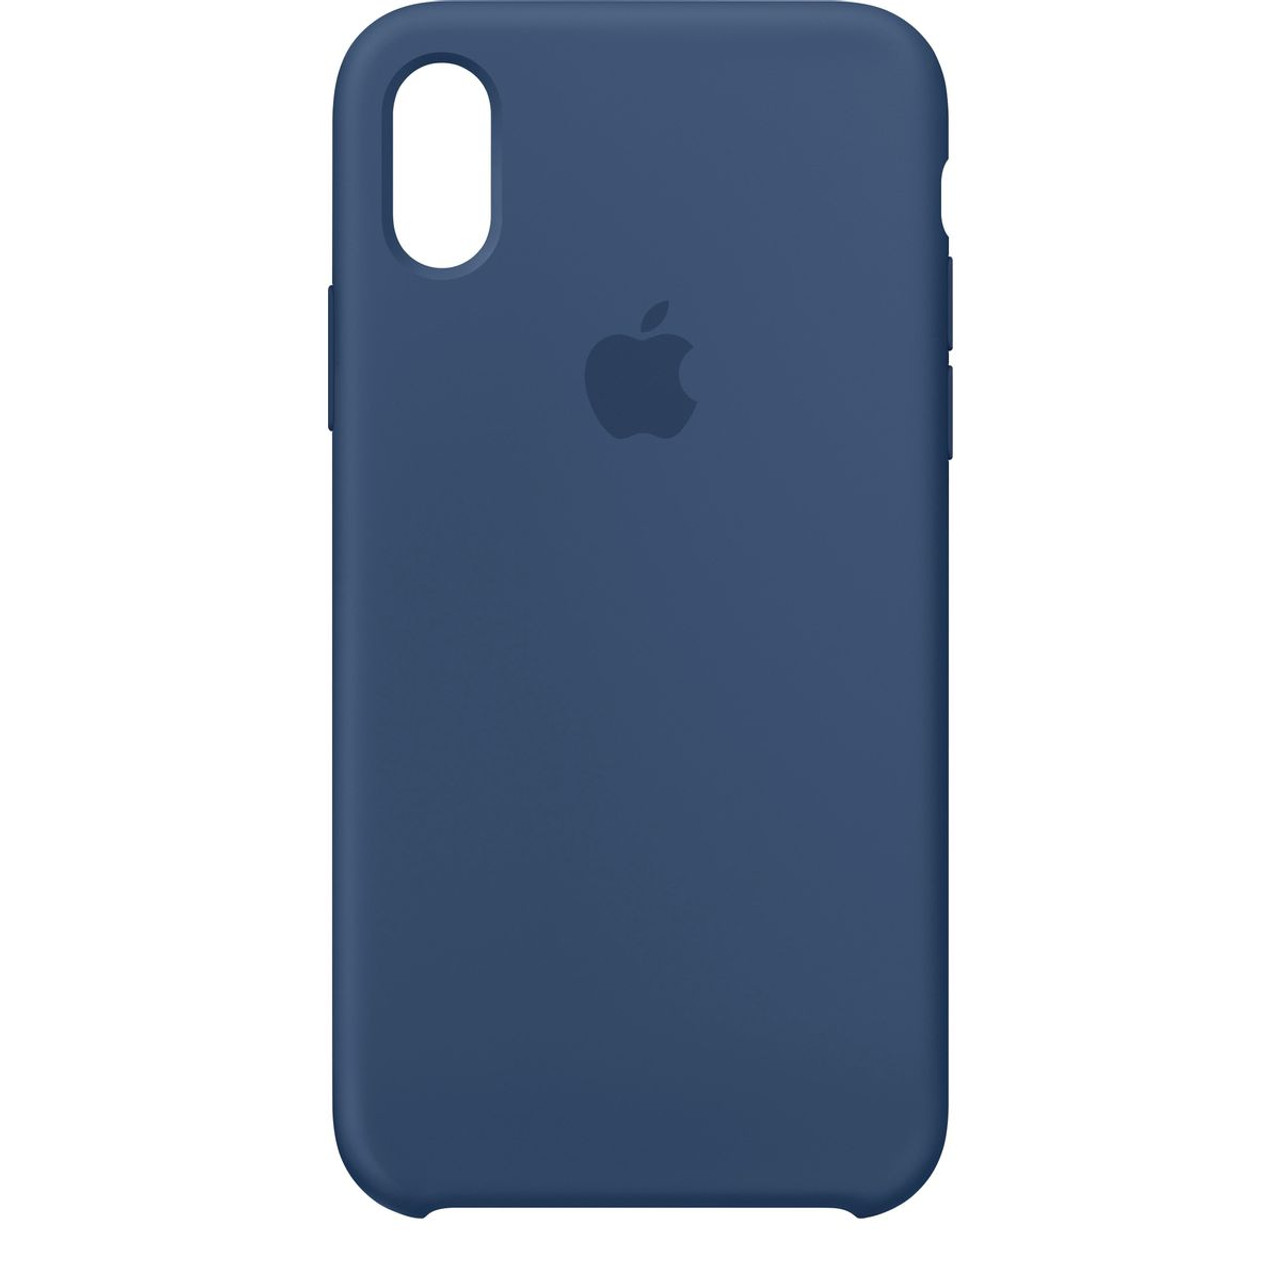 Apple iPhone X Silicone Case product image